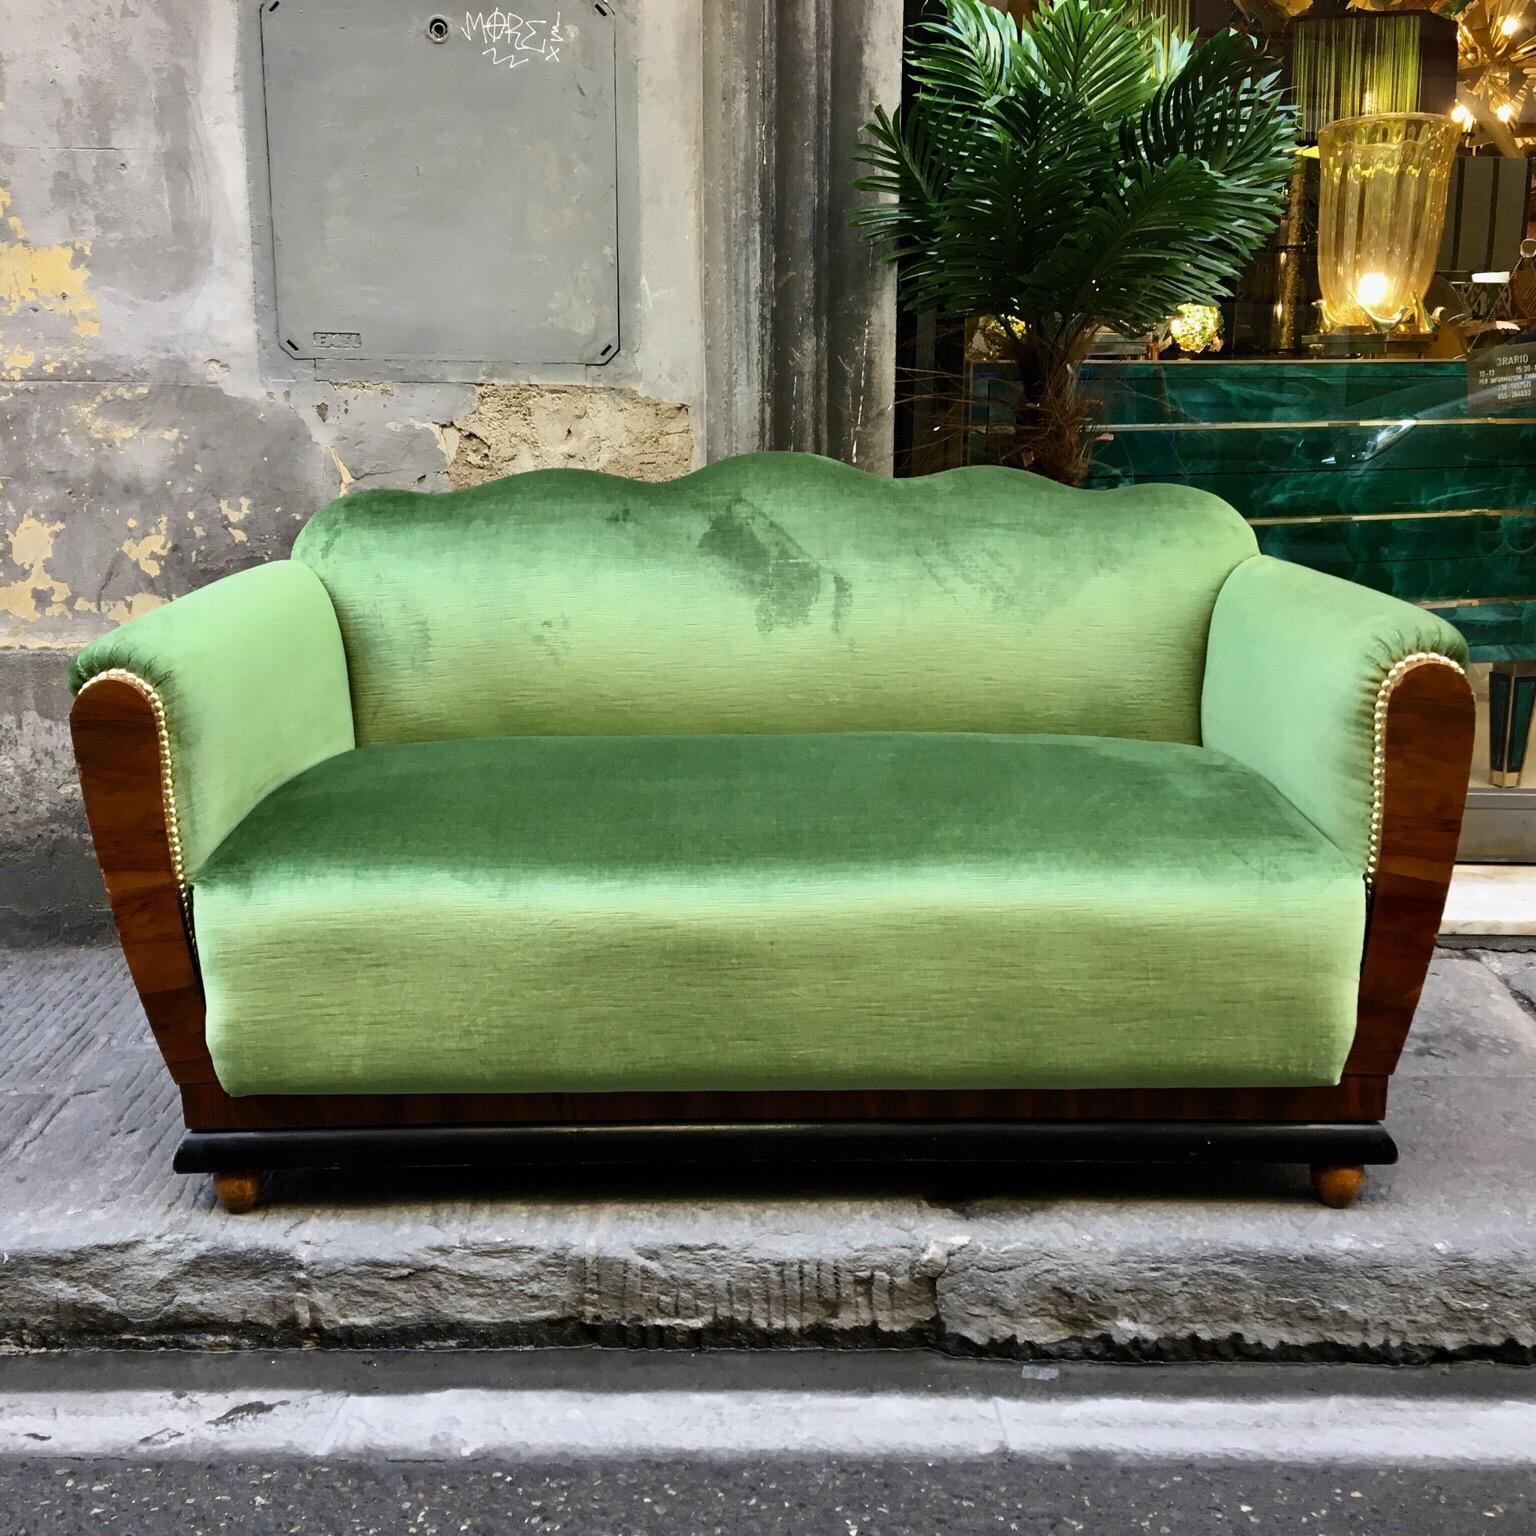 Small Art Deco sofa, the sides are made in a fine briar root wood. We have reupholstered with acid green velvet. Only light conservative Restoration of the wooden part has been done. This sofa is able to fit both an entrance or a living room with a